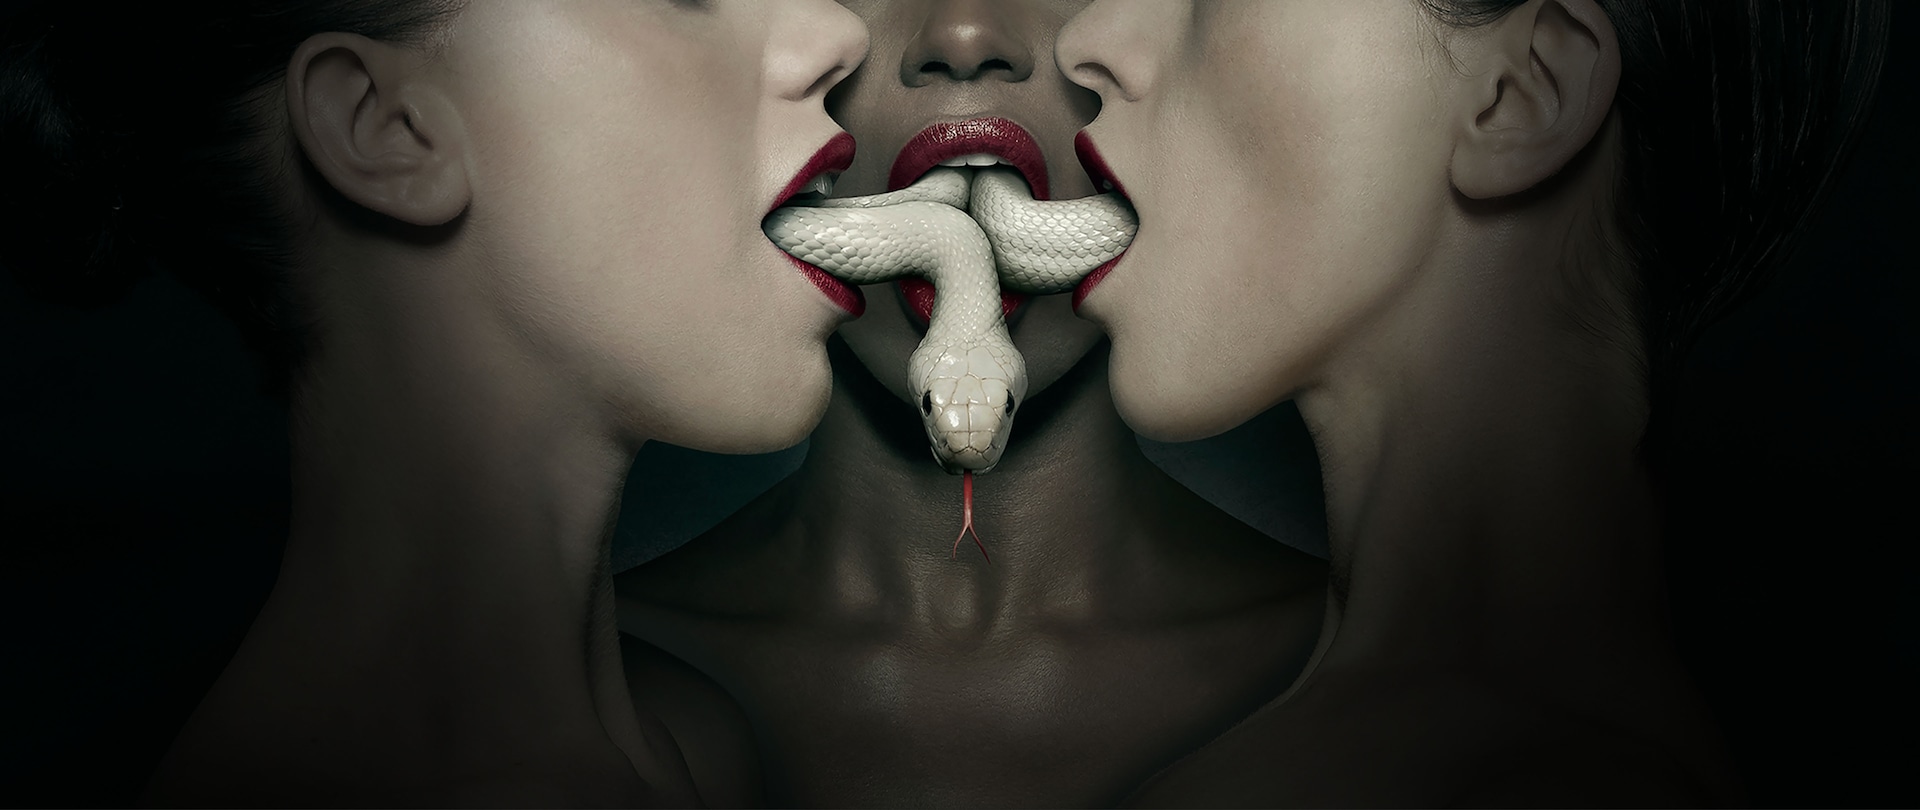 Three women wearing plum lipstick with a white snake weaving through their open mouths for AHS Installment 3 Coven